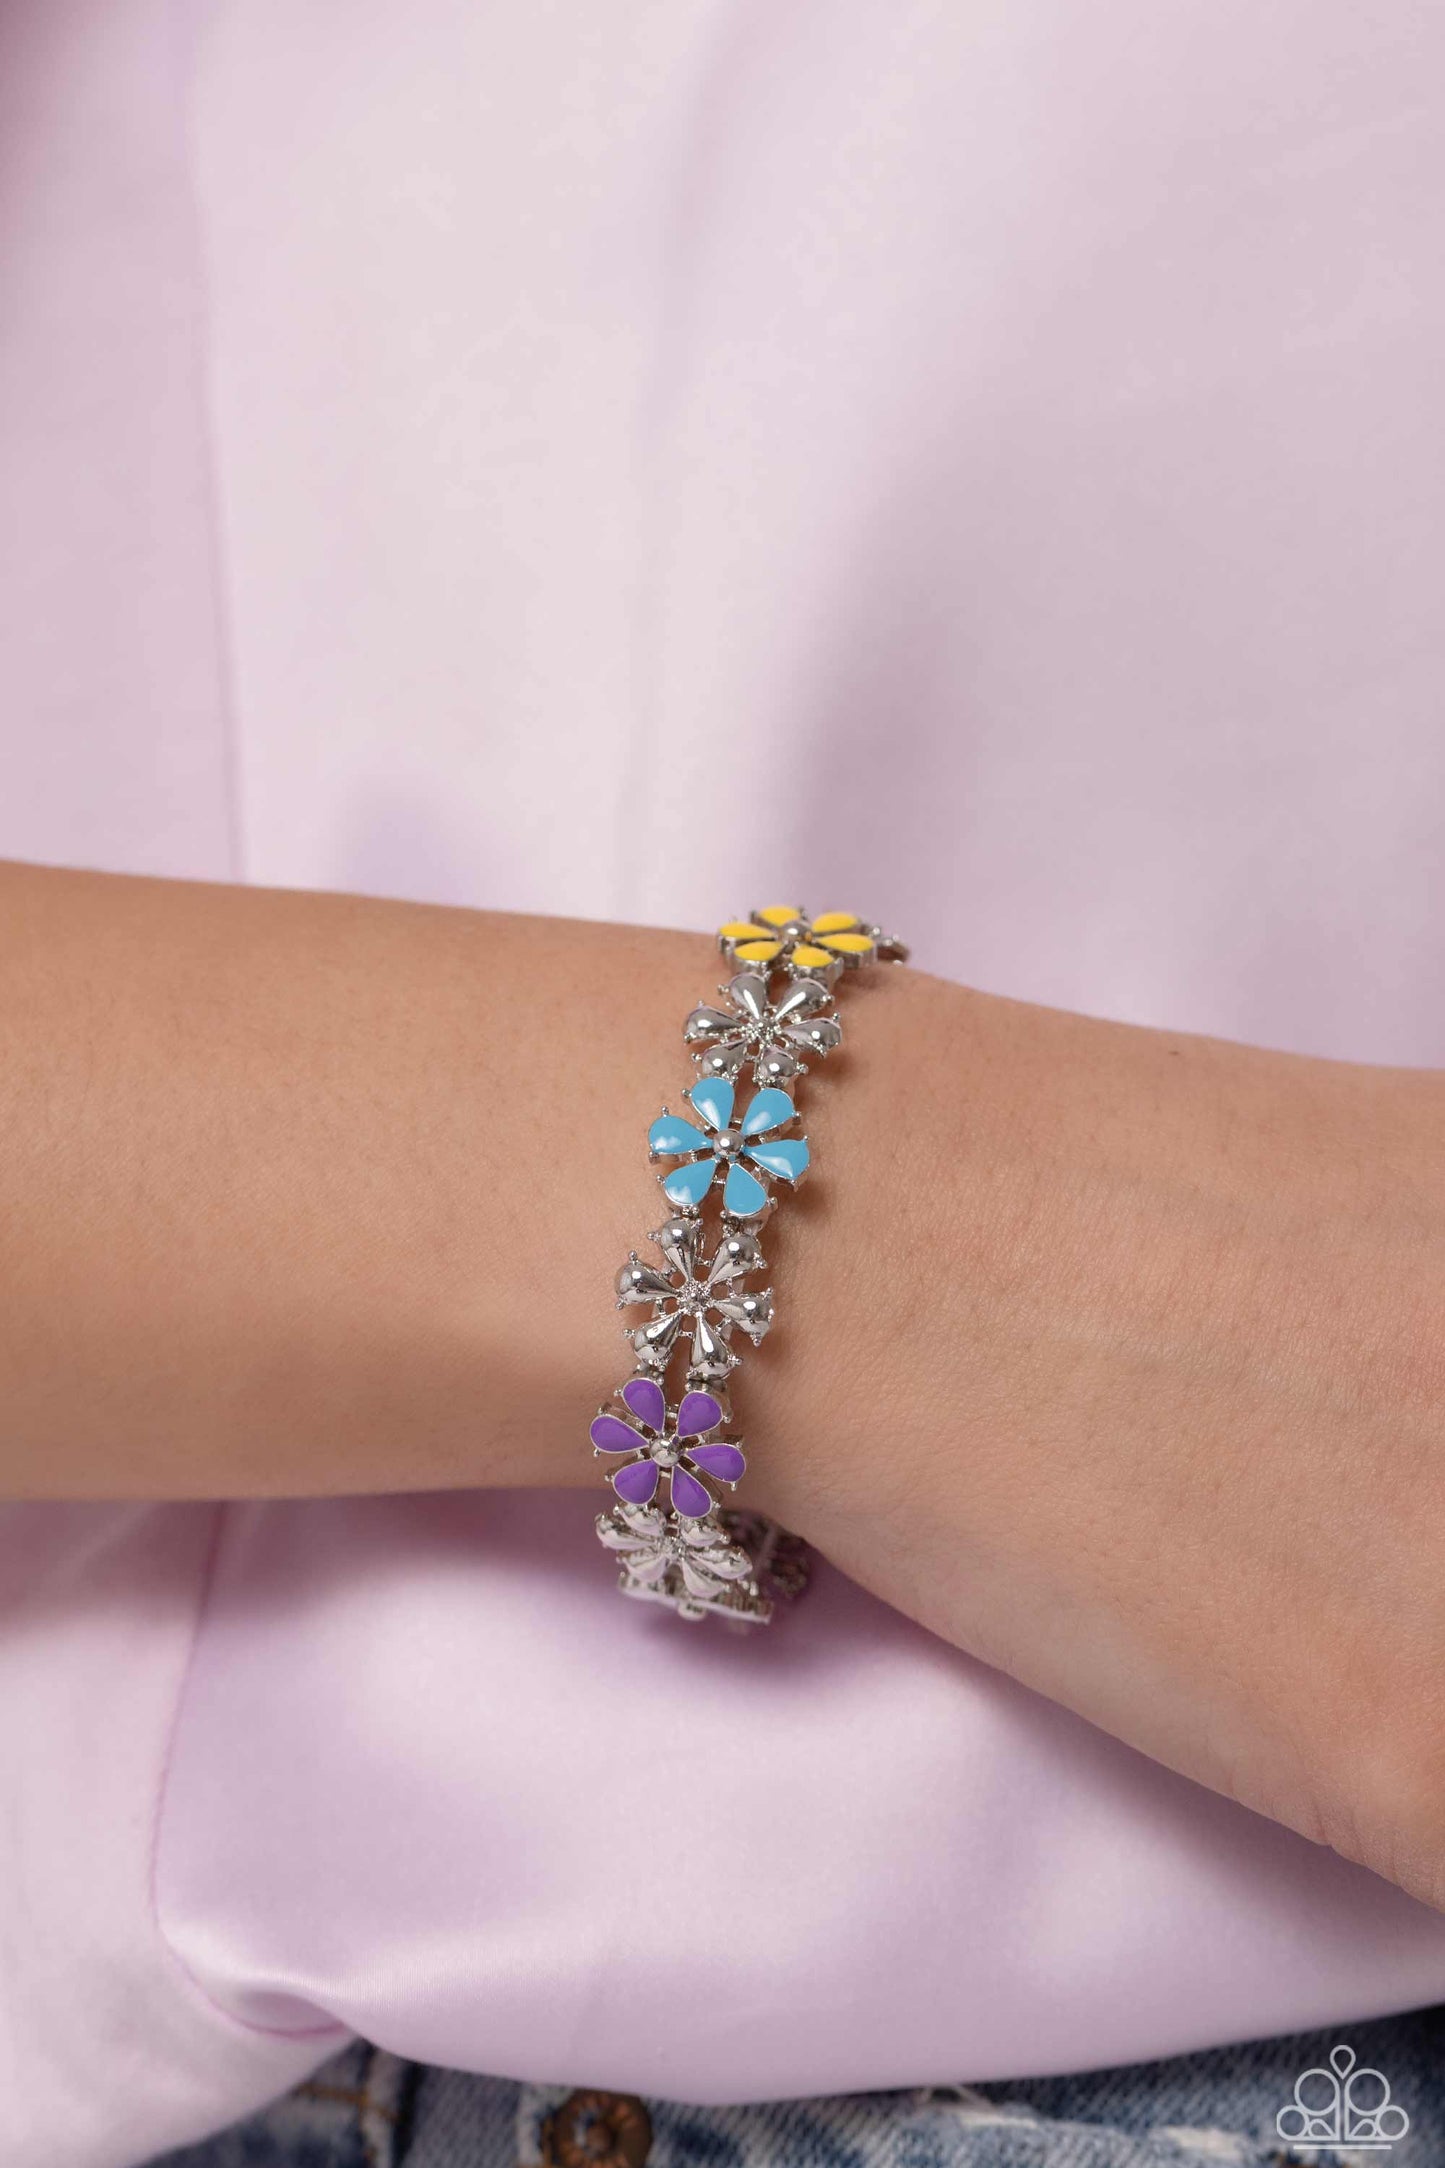 Paparazzi Accessories Floral Fair - Multi Painted in vivacious shades of hot pink, turquoise, yellow, purple, and white, a collection of silver studded flowers alternating with high-sheen silver flowers glides across the wrist from an elastic stretchy ban